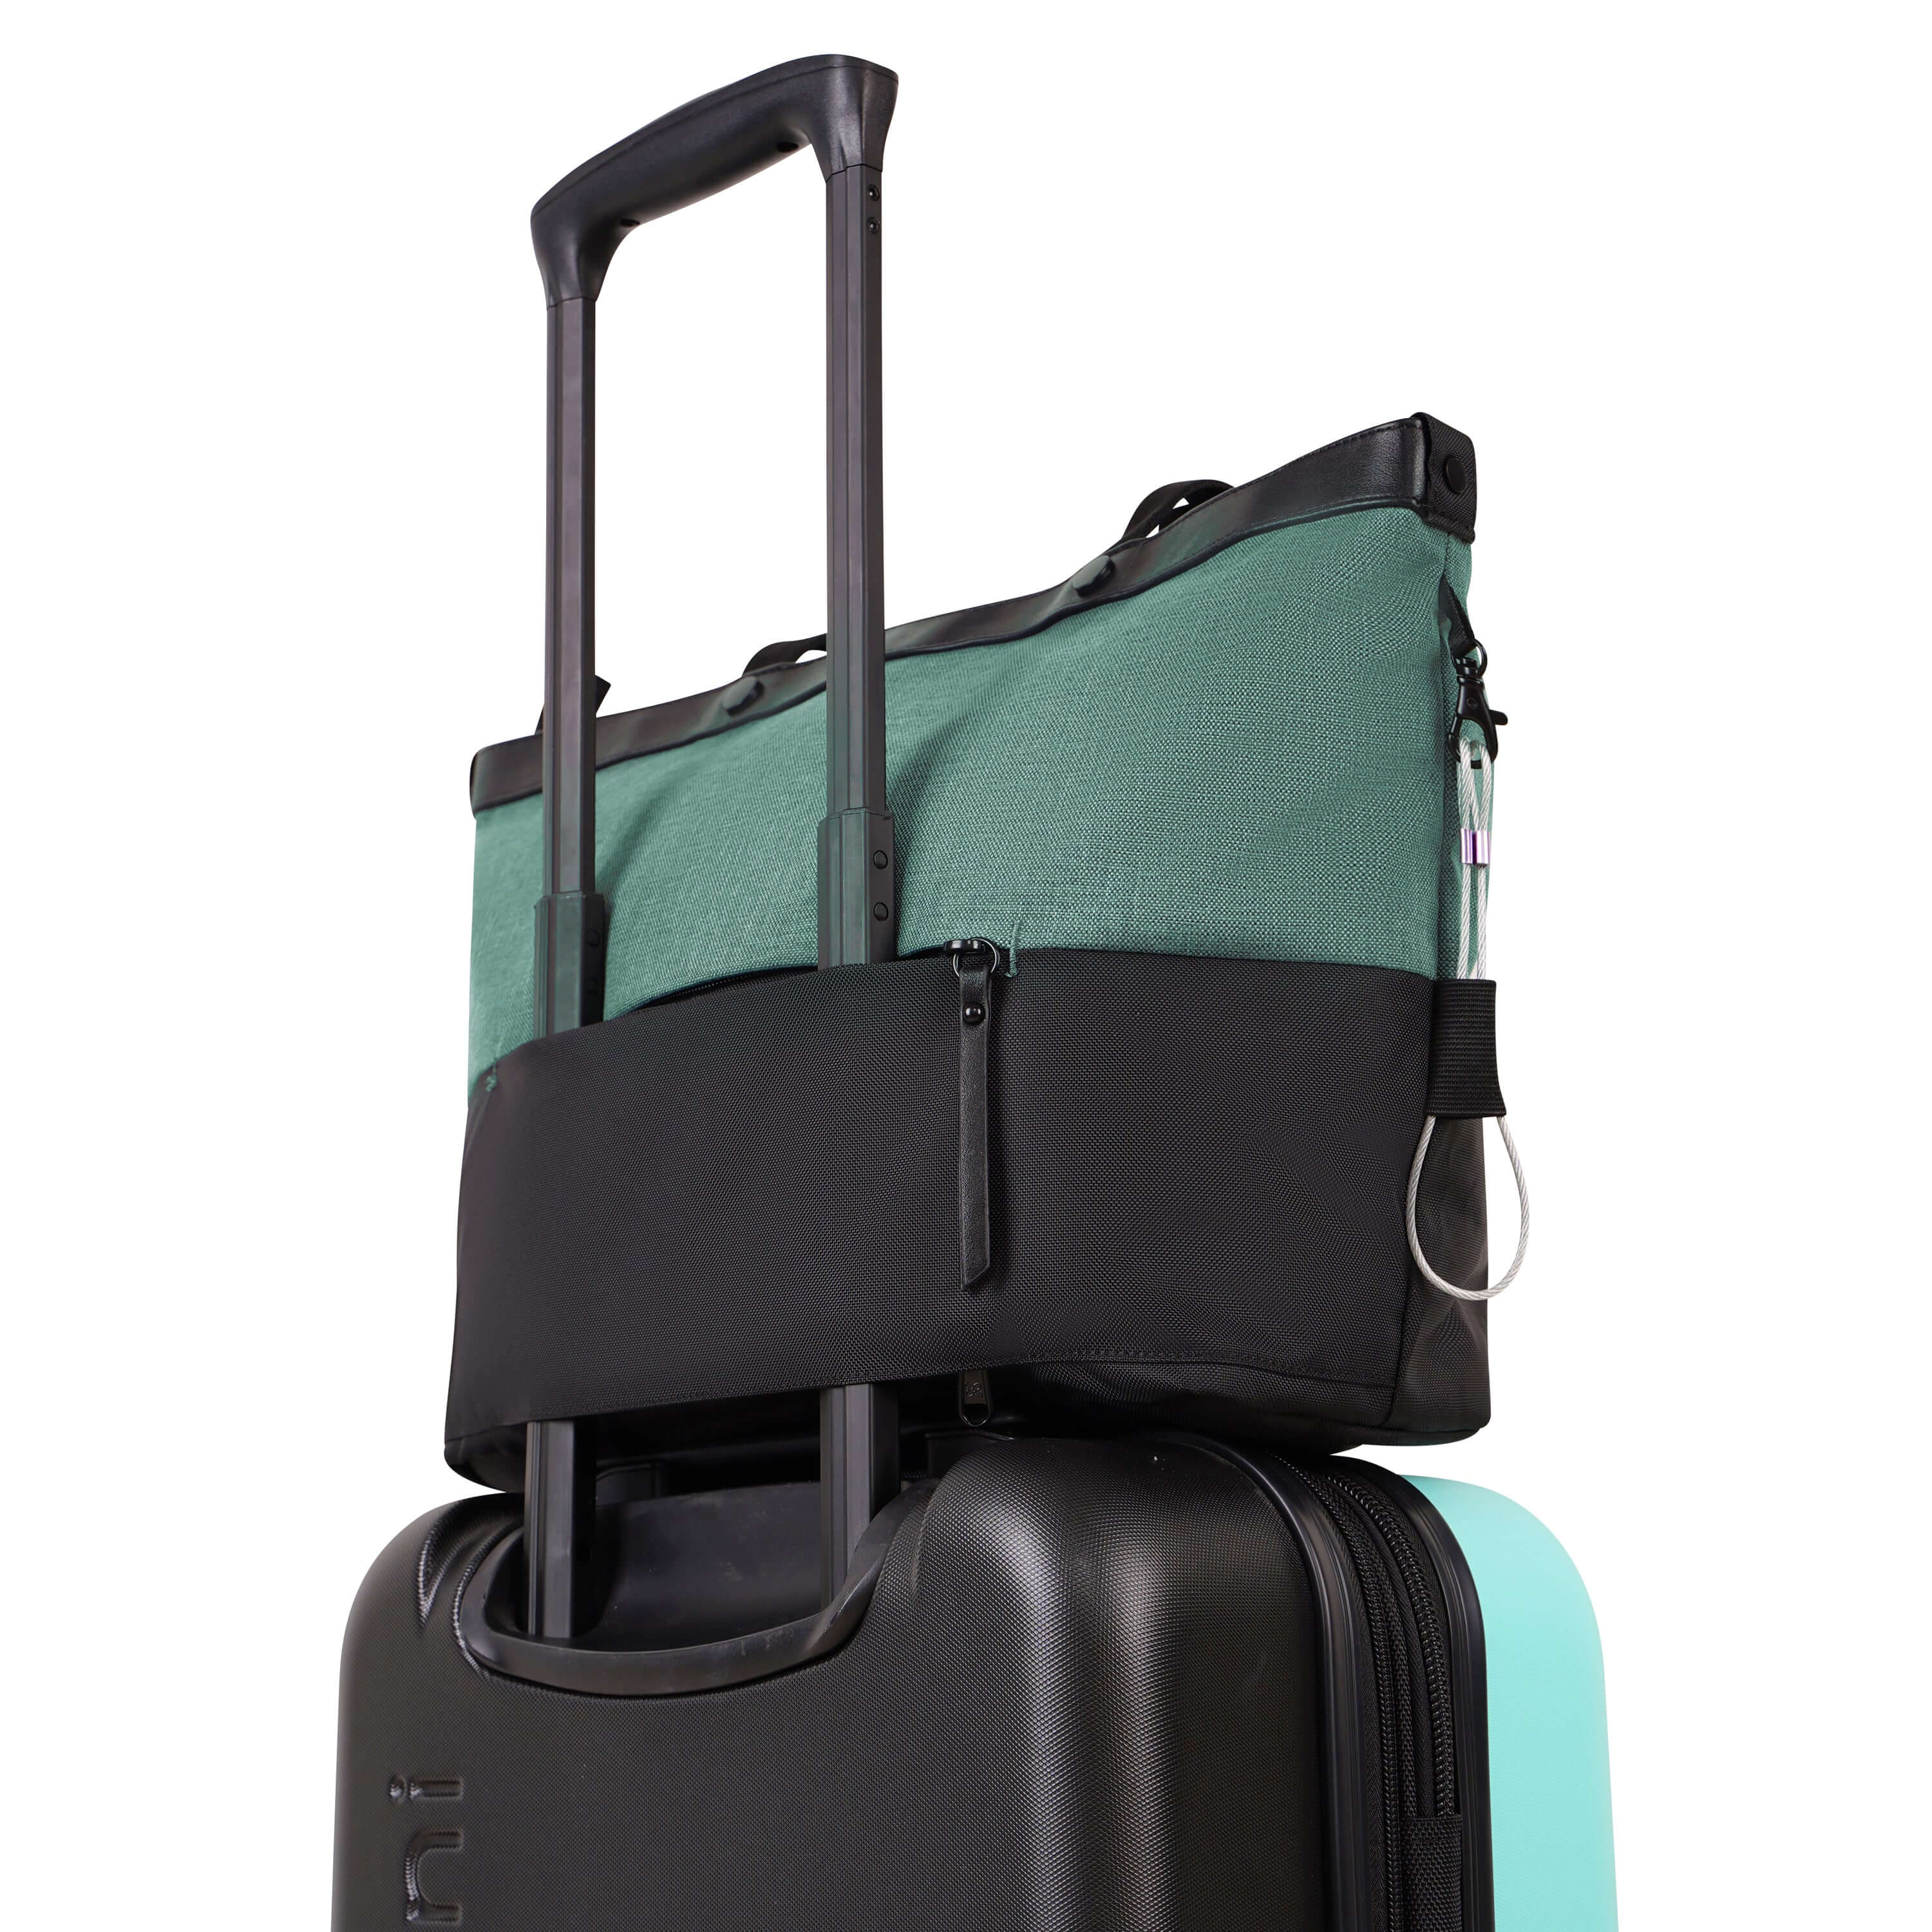 Back view of Sherpani's Anti-Theft bag the Cali AT in Teal. The exterior zipper pocket is unzipped at both ends creating the luggage pass-through. The bag sits on top of Sherpani's luggage the Meridian in Caribe, the handle of the suitcase running through the pass-through, securing the Cali AT to the Meridian for easy travel.